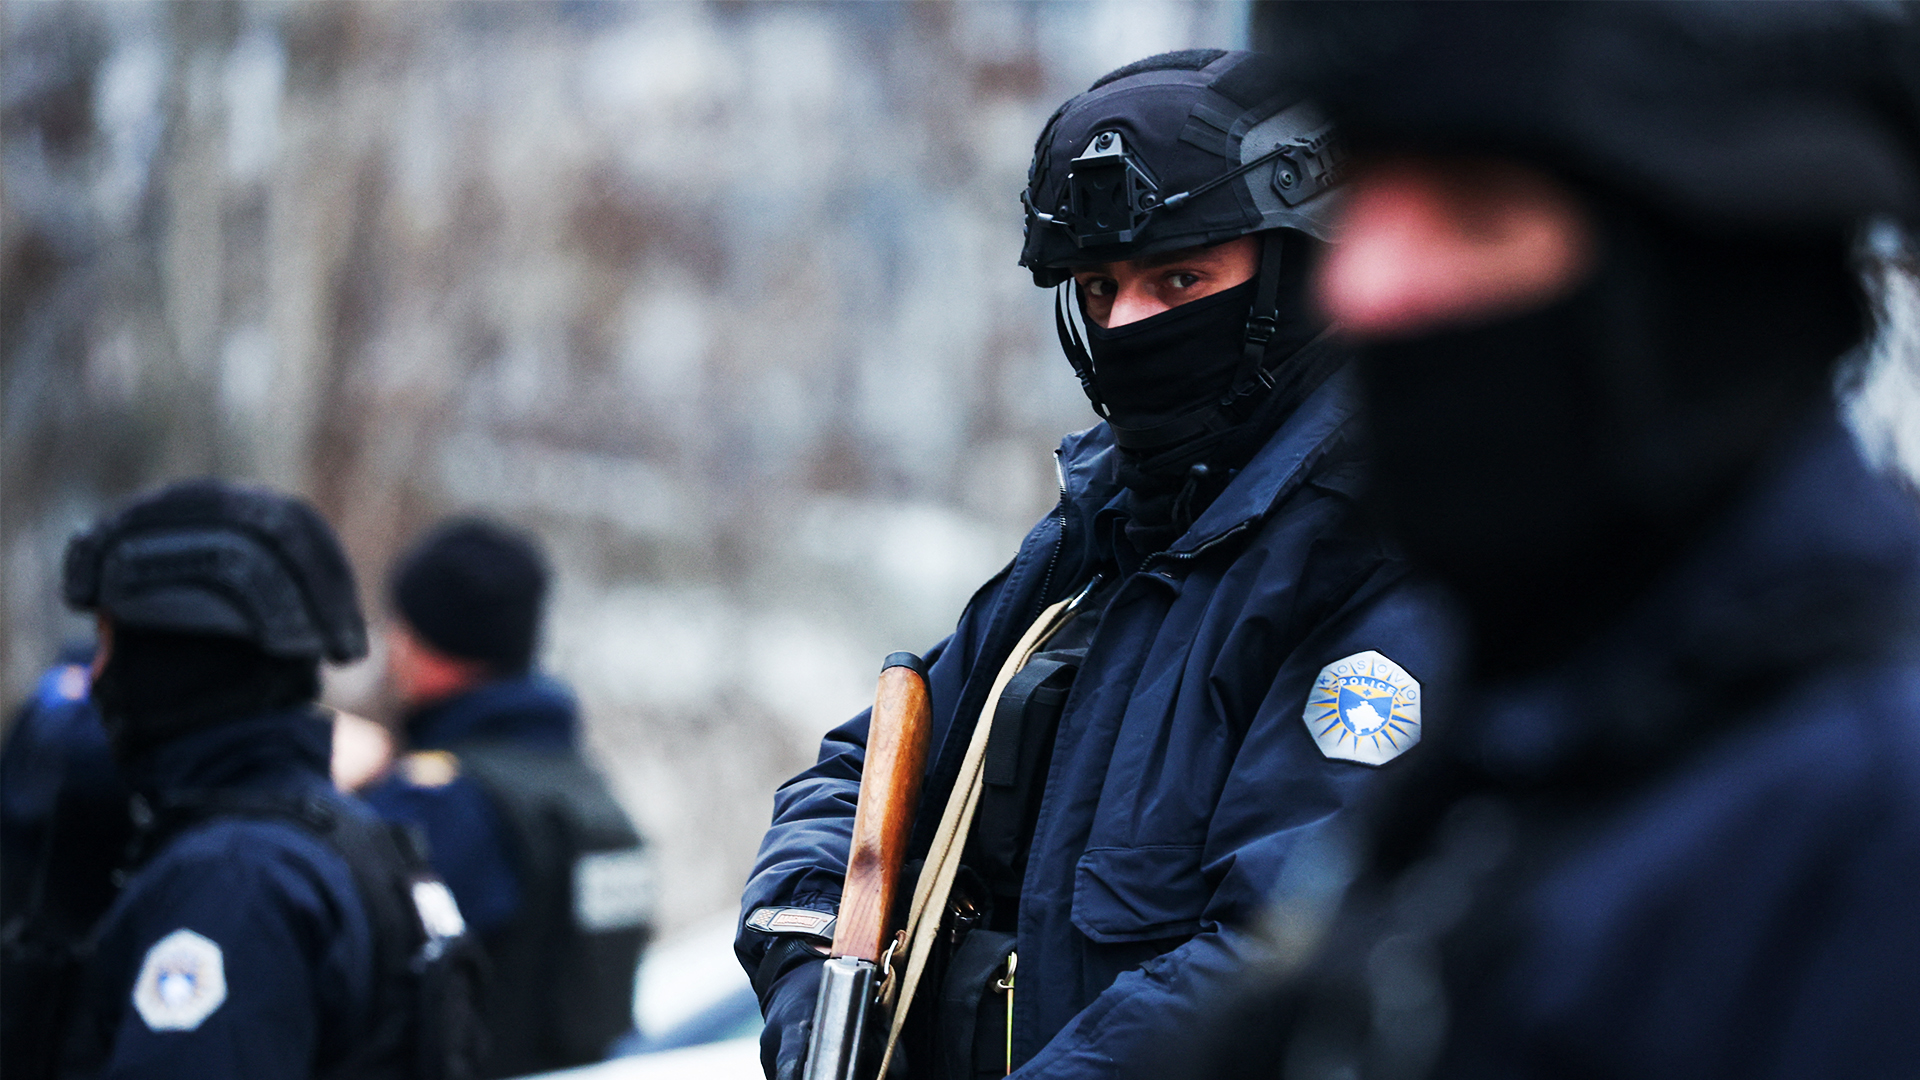 Kosovo police officers on patrol./Florion Goga/Reuters